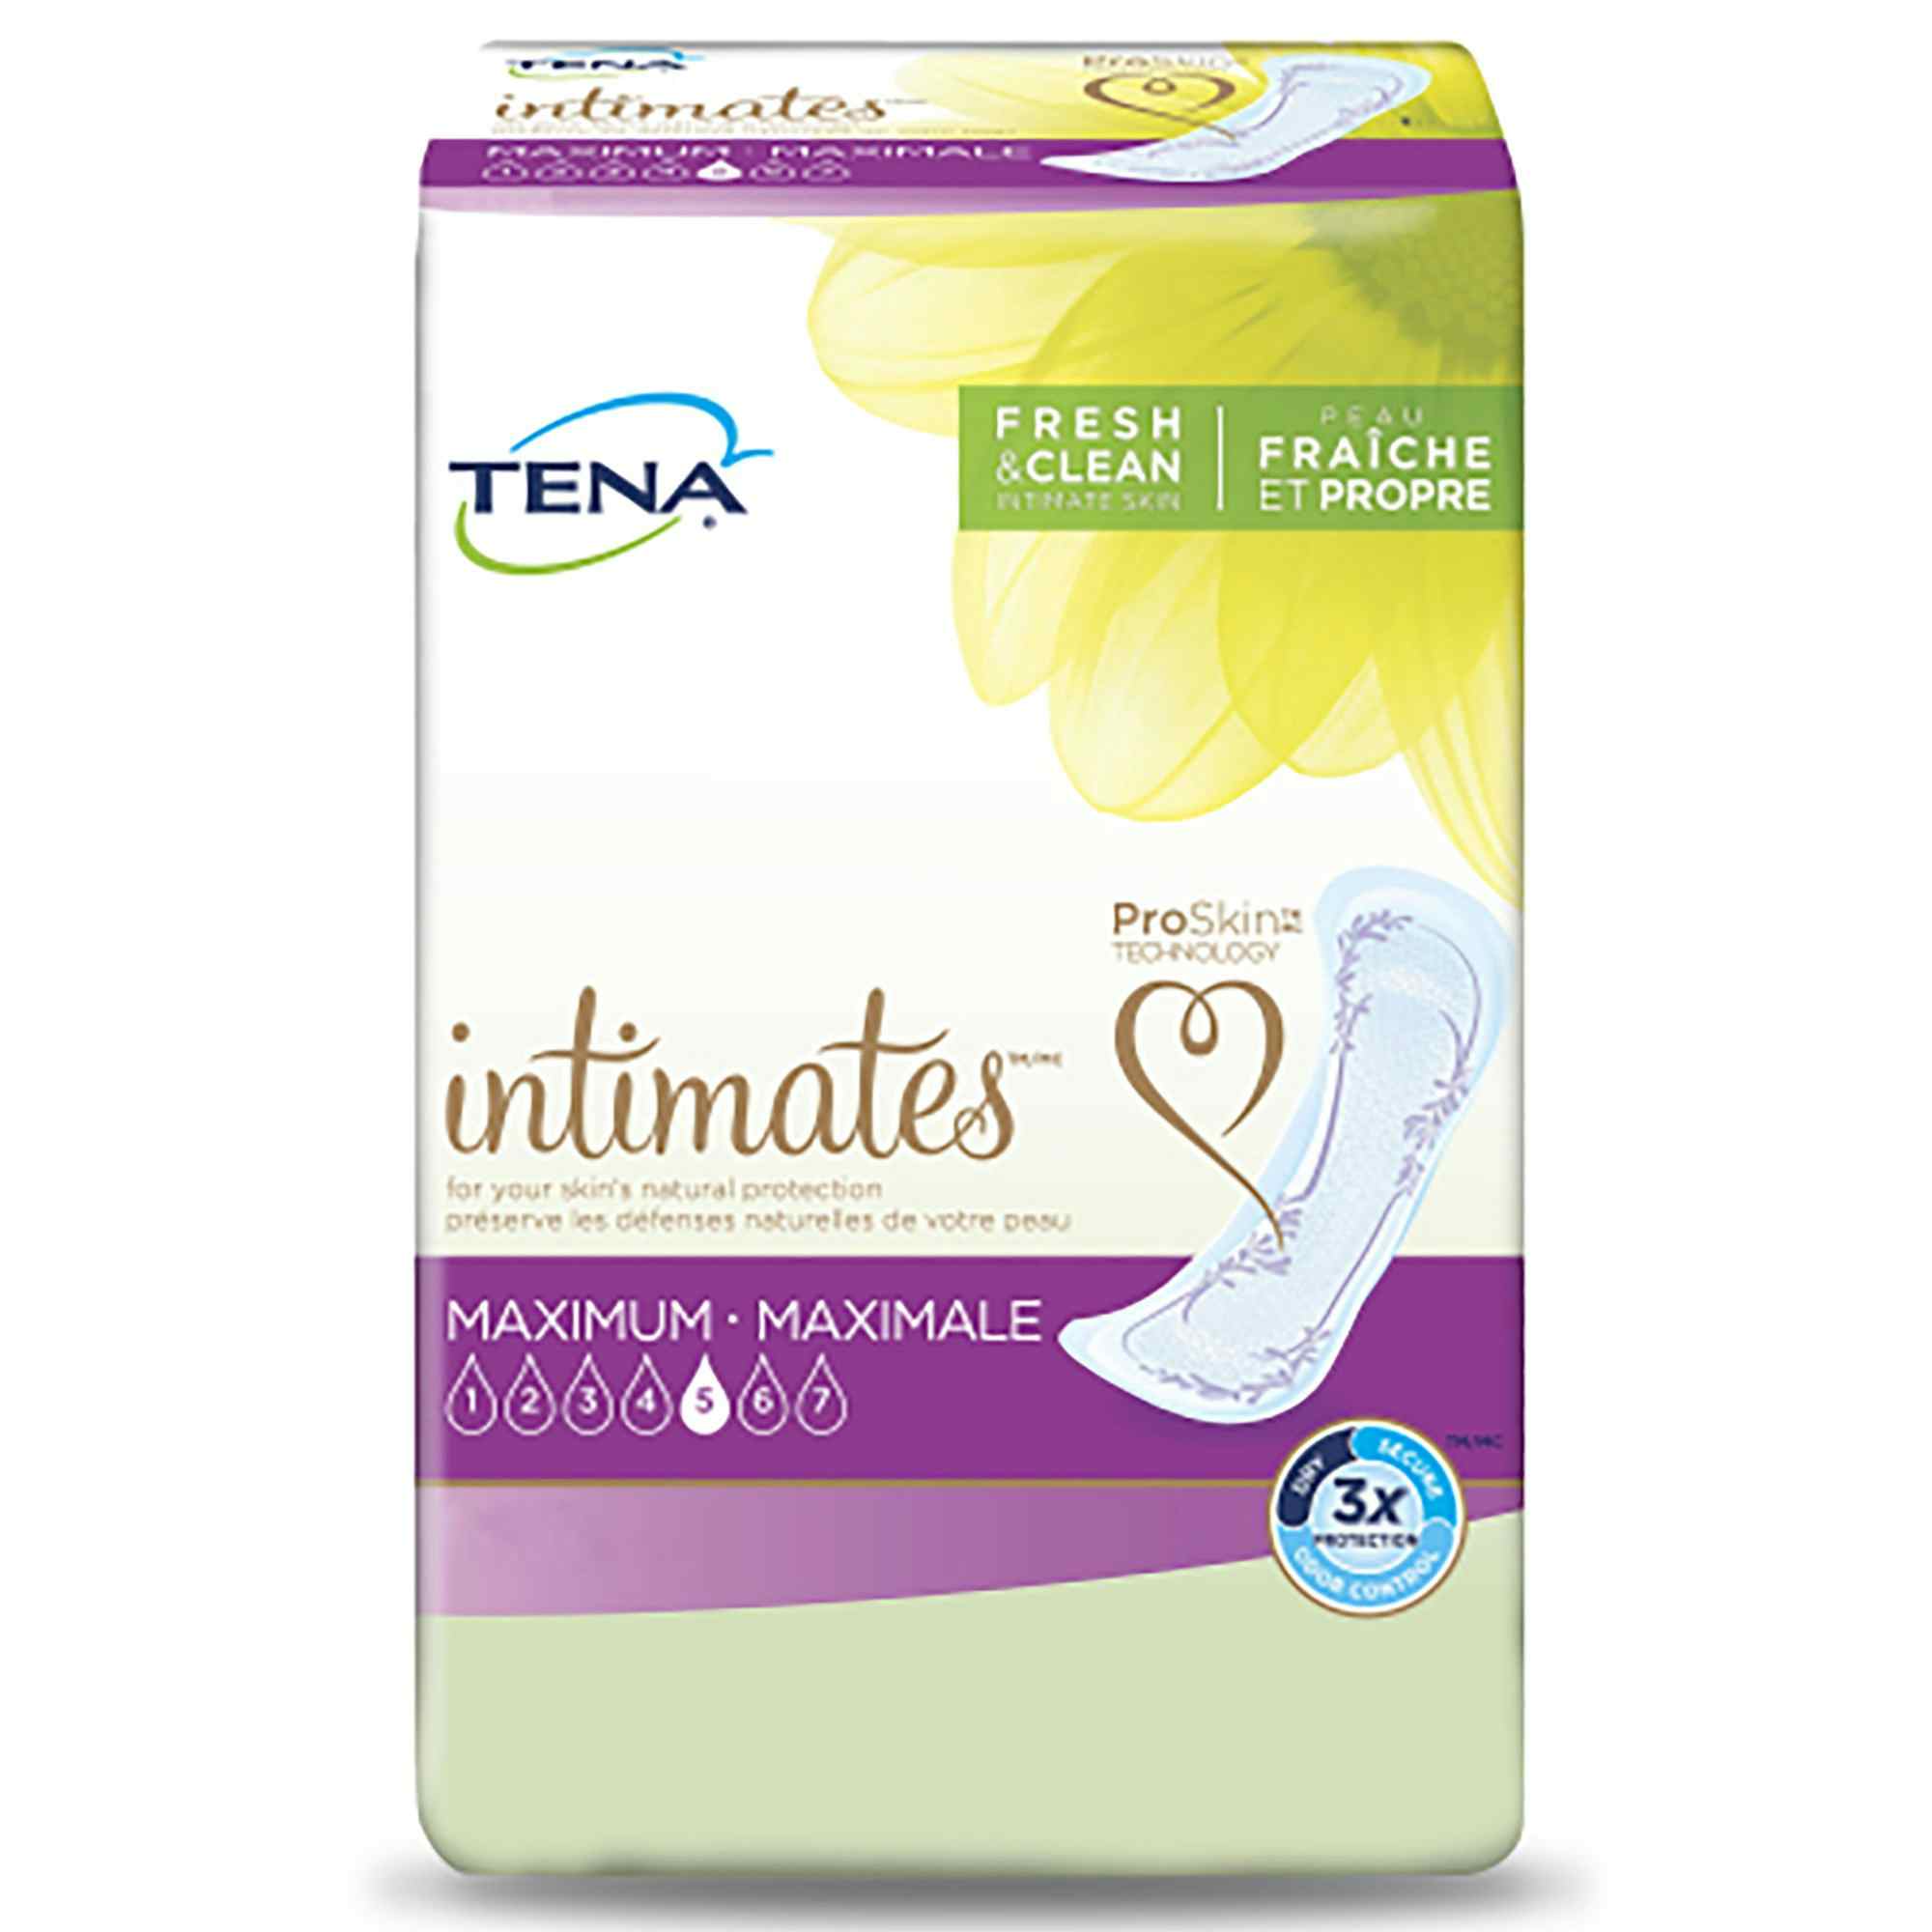 TENA Intimates Maximum Adult Female Disposable Bladder Control Pad, Heavy Absorbency , 54268, One Size Fits Most (15") - Bag of 12